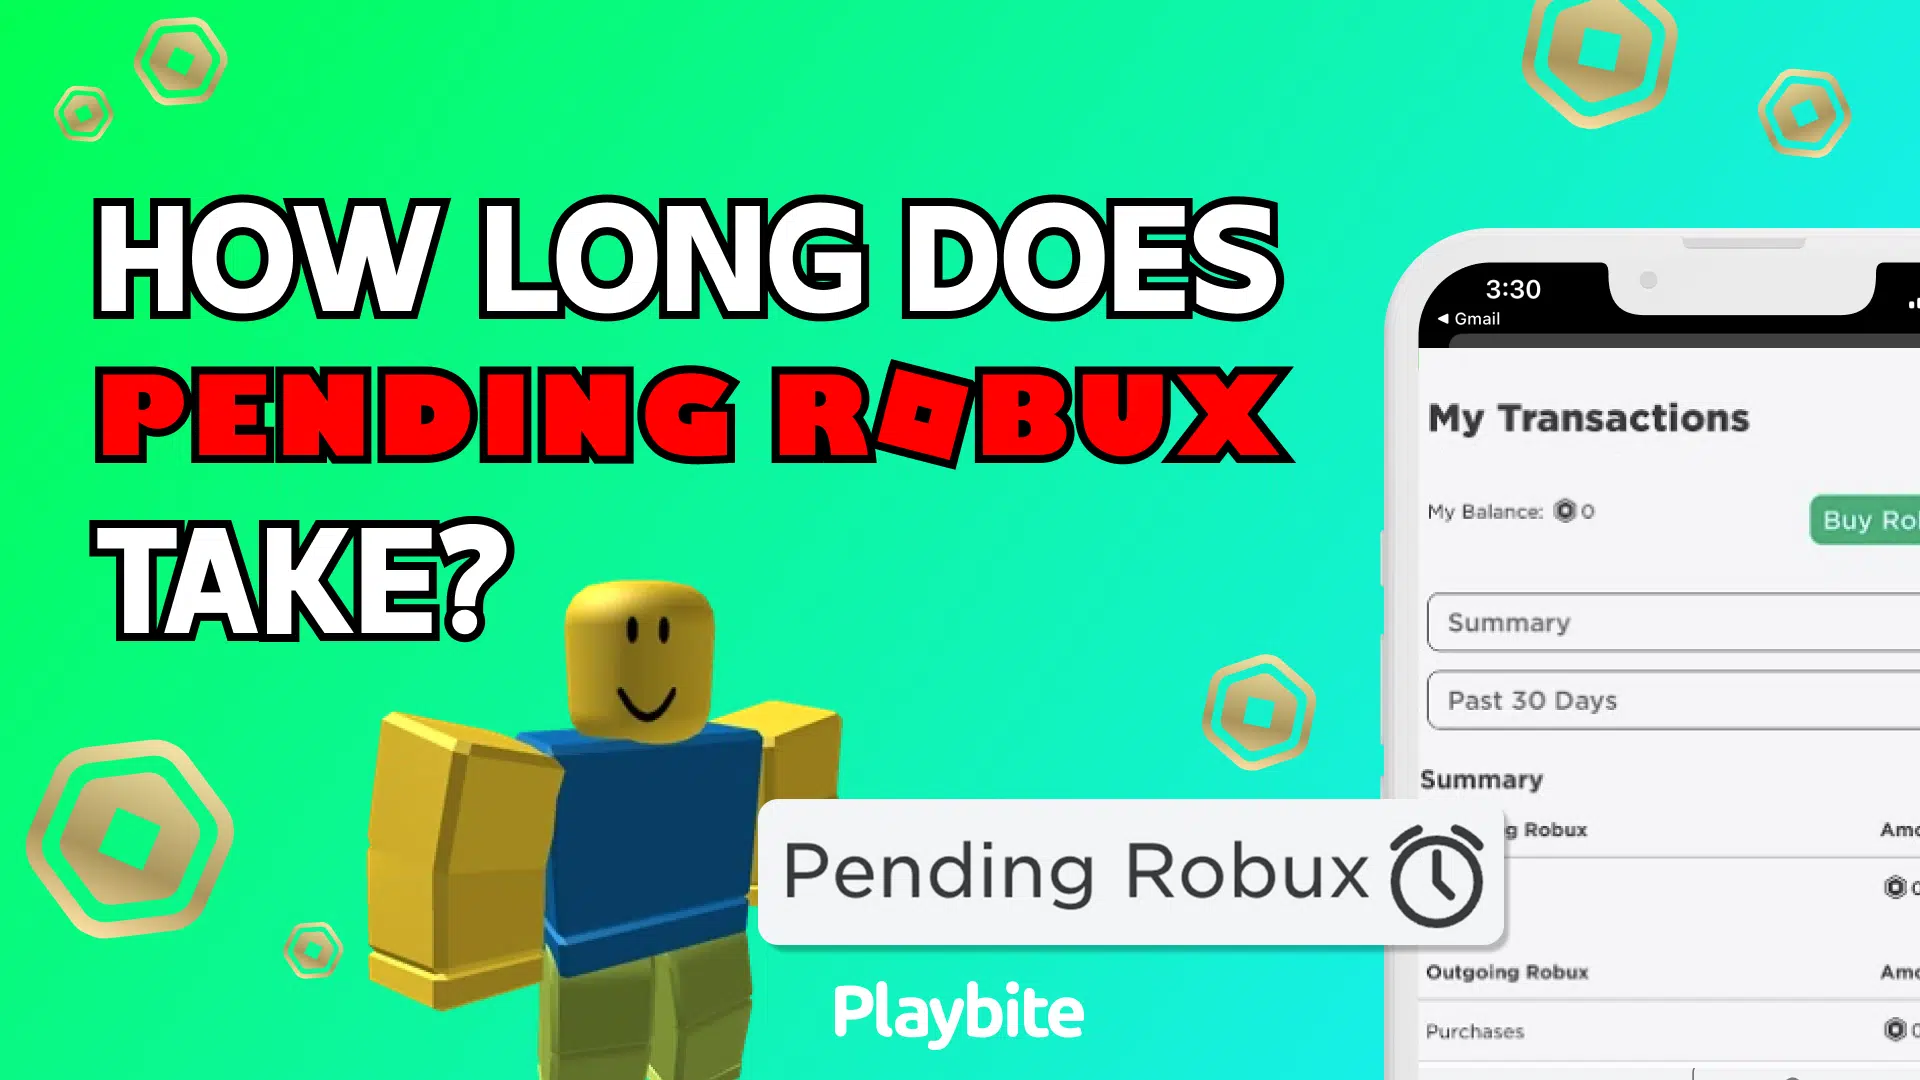 How Long Does Pending Robux Take?